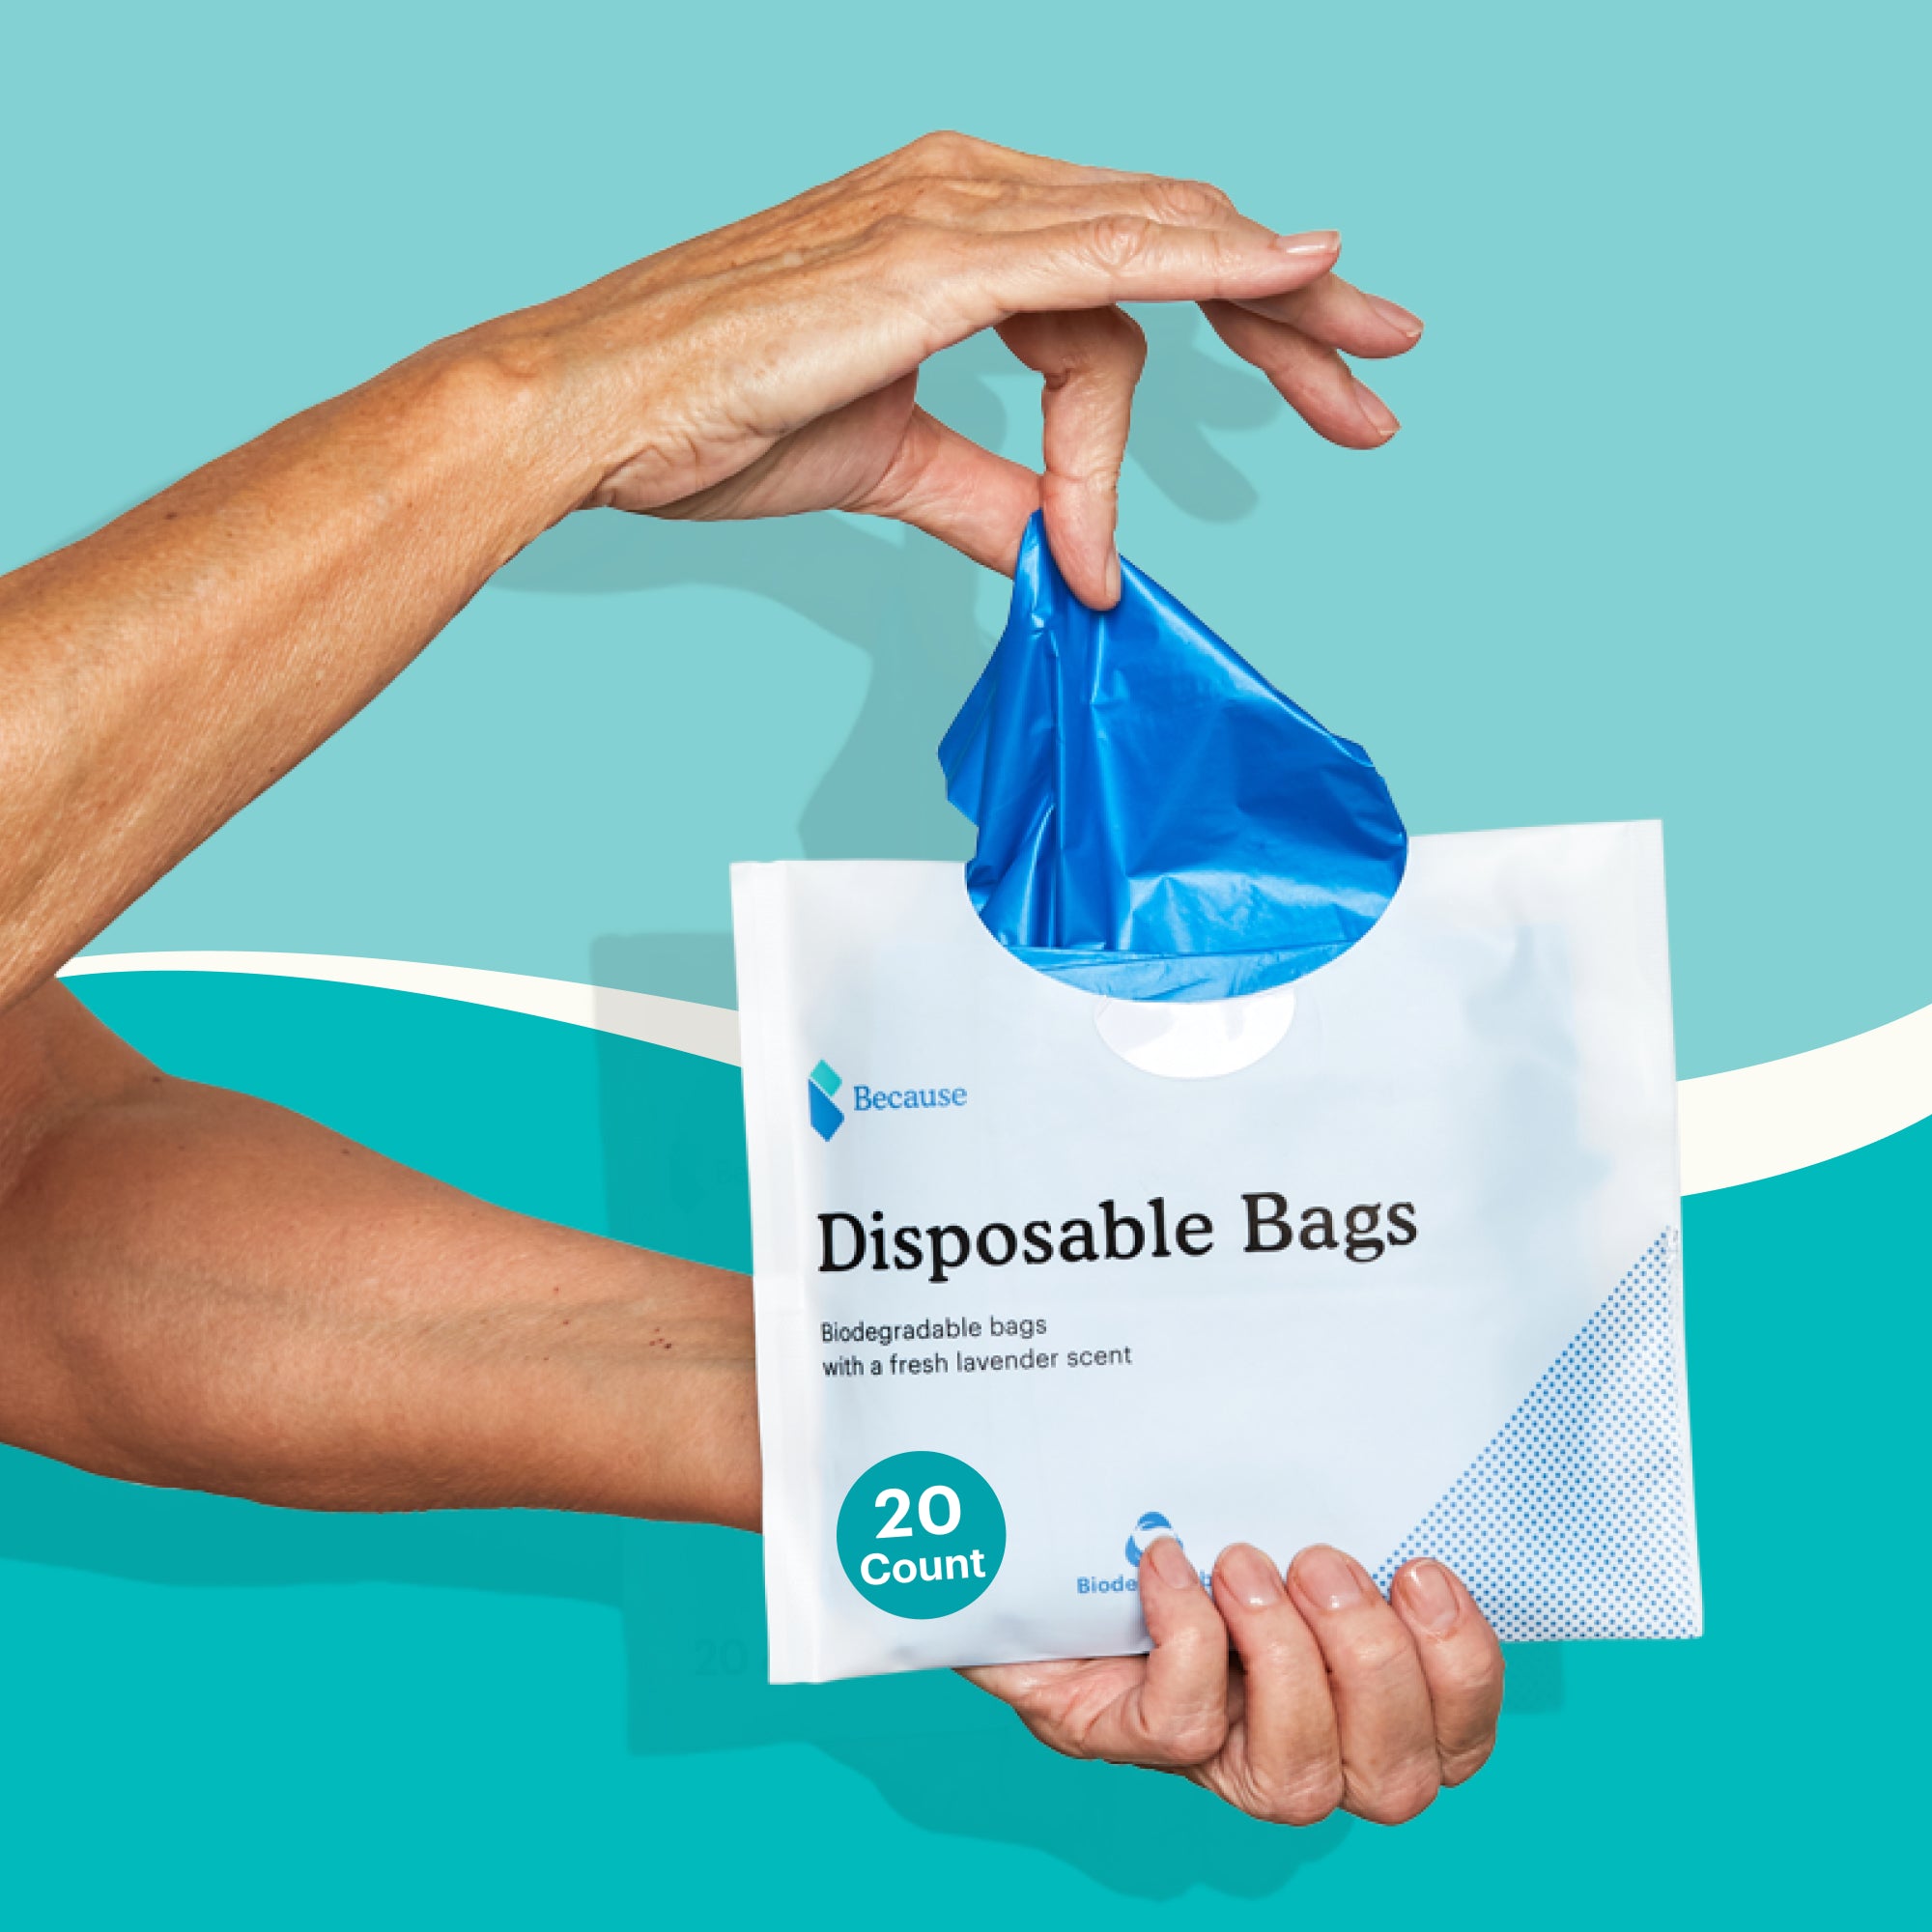 Because Biodegradable Scented Bags